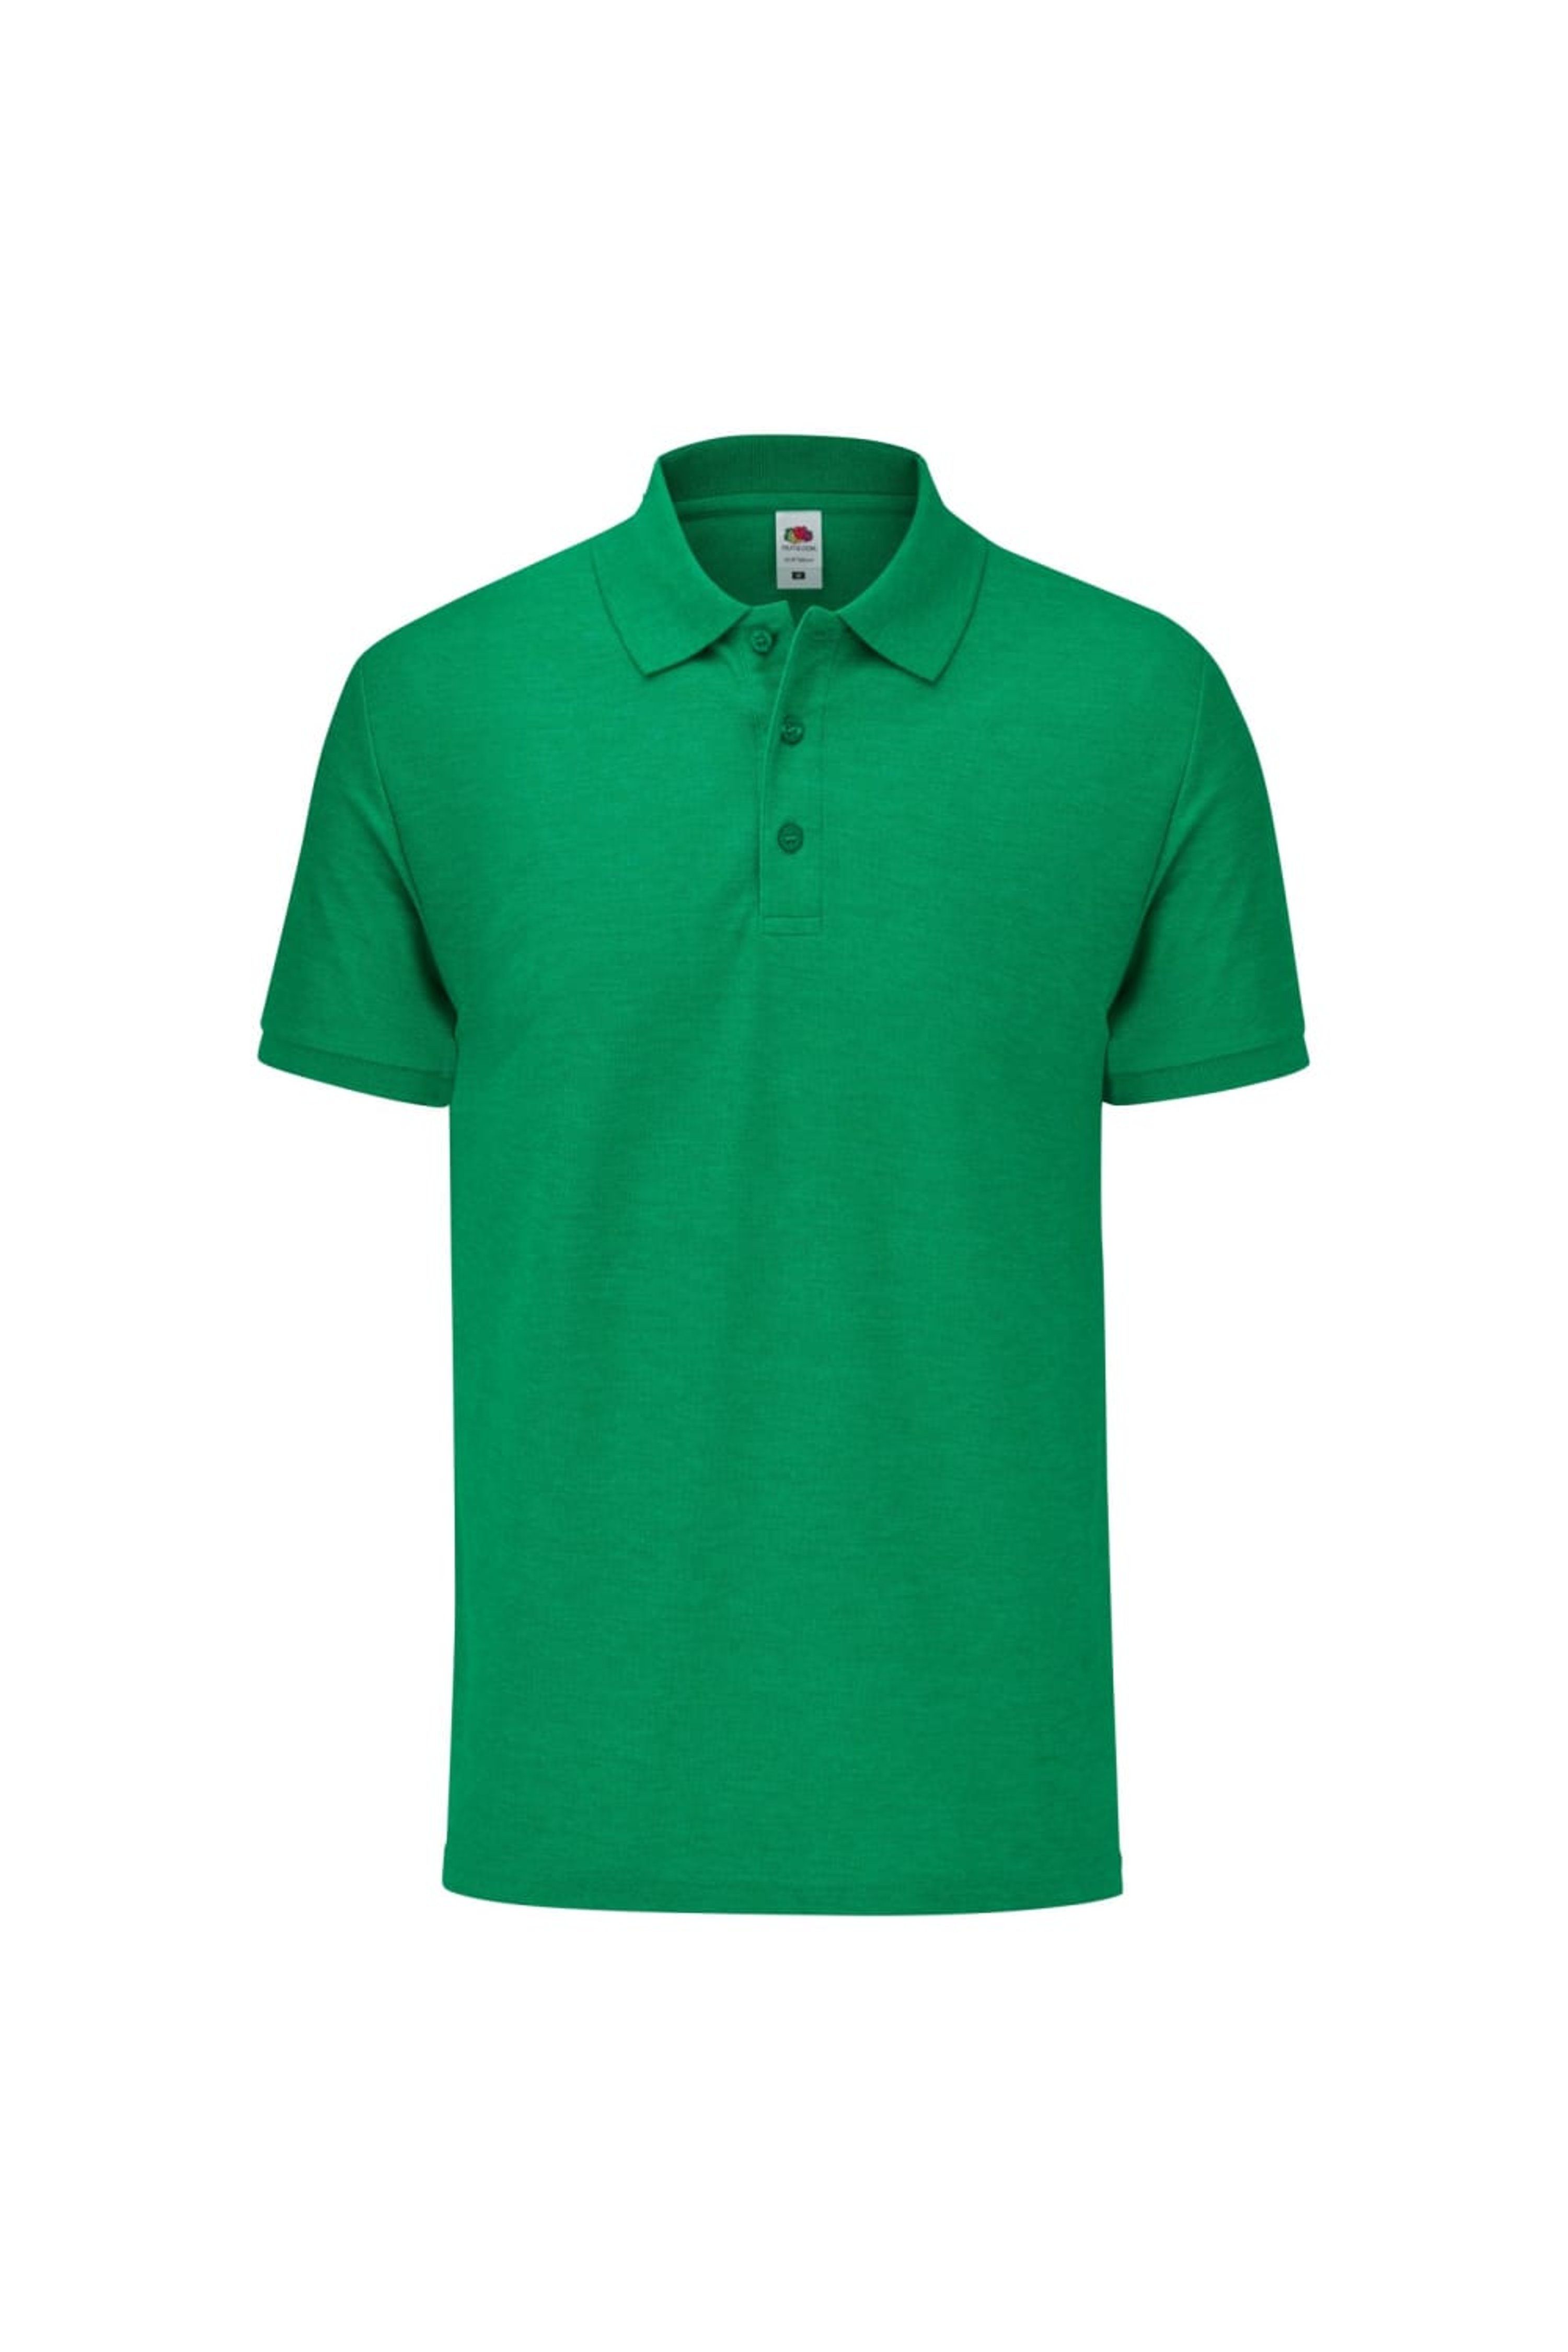 Fruit Of The Loom Mens Tailored Polo Shirt (Green Heather) - 3XL - Also in: M, L, XXL, S, XL | Verishop